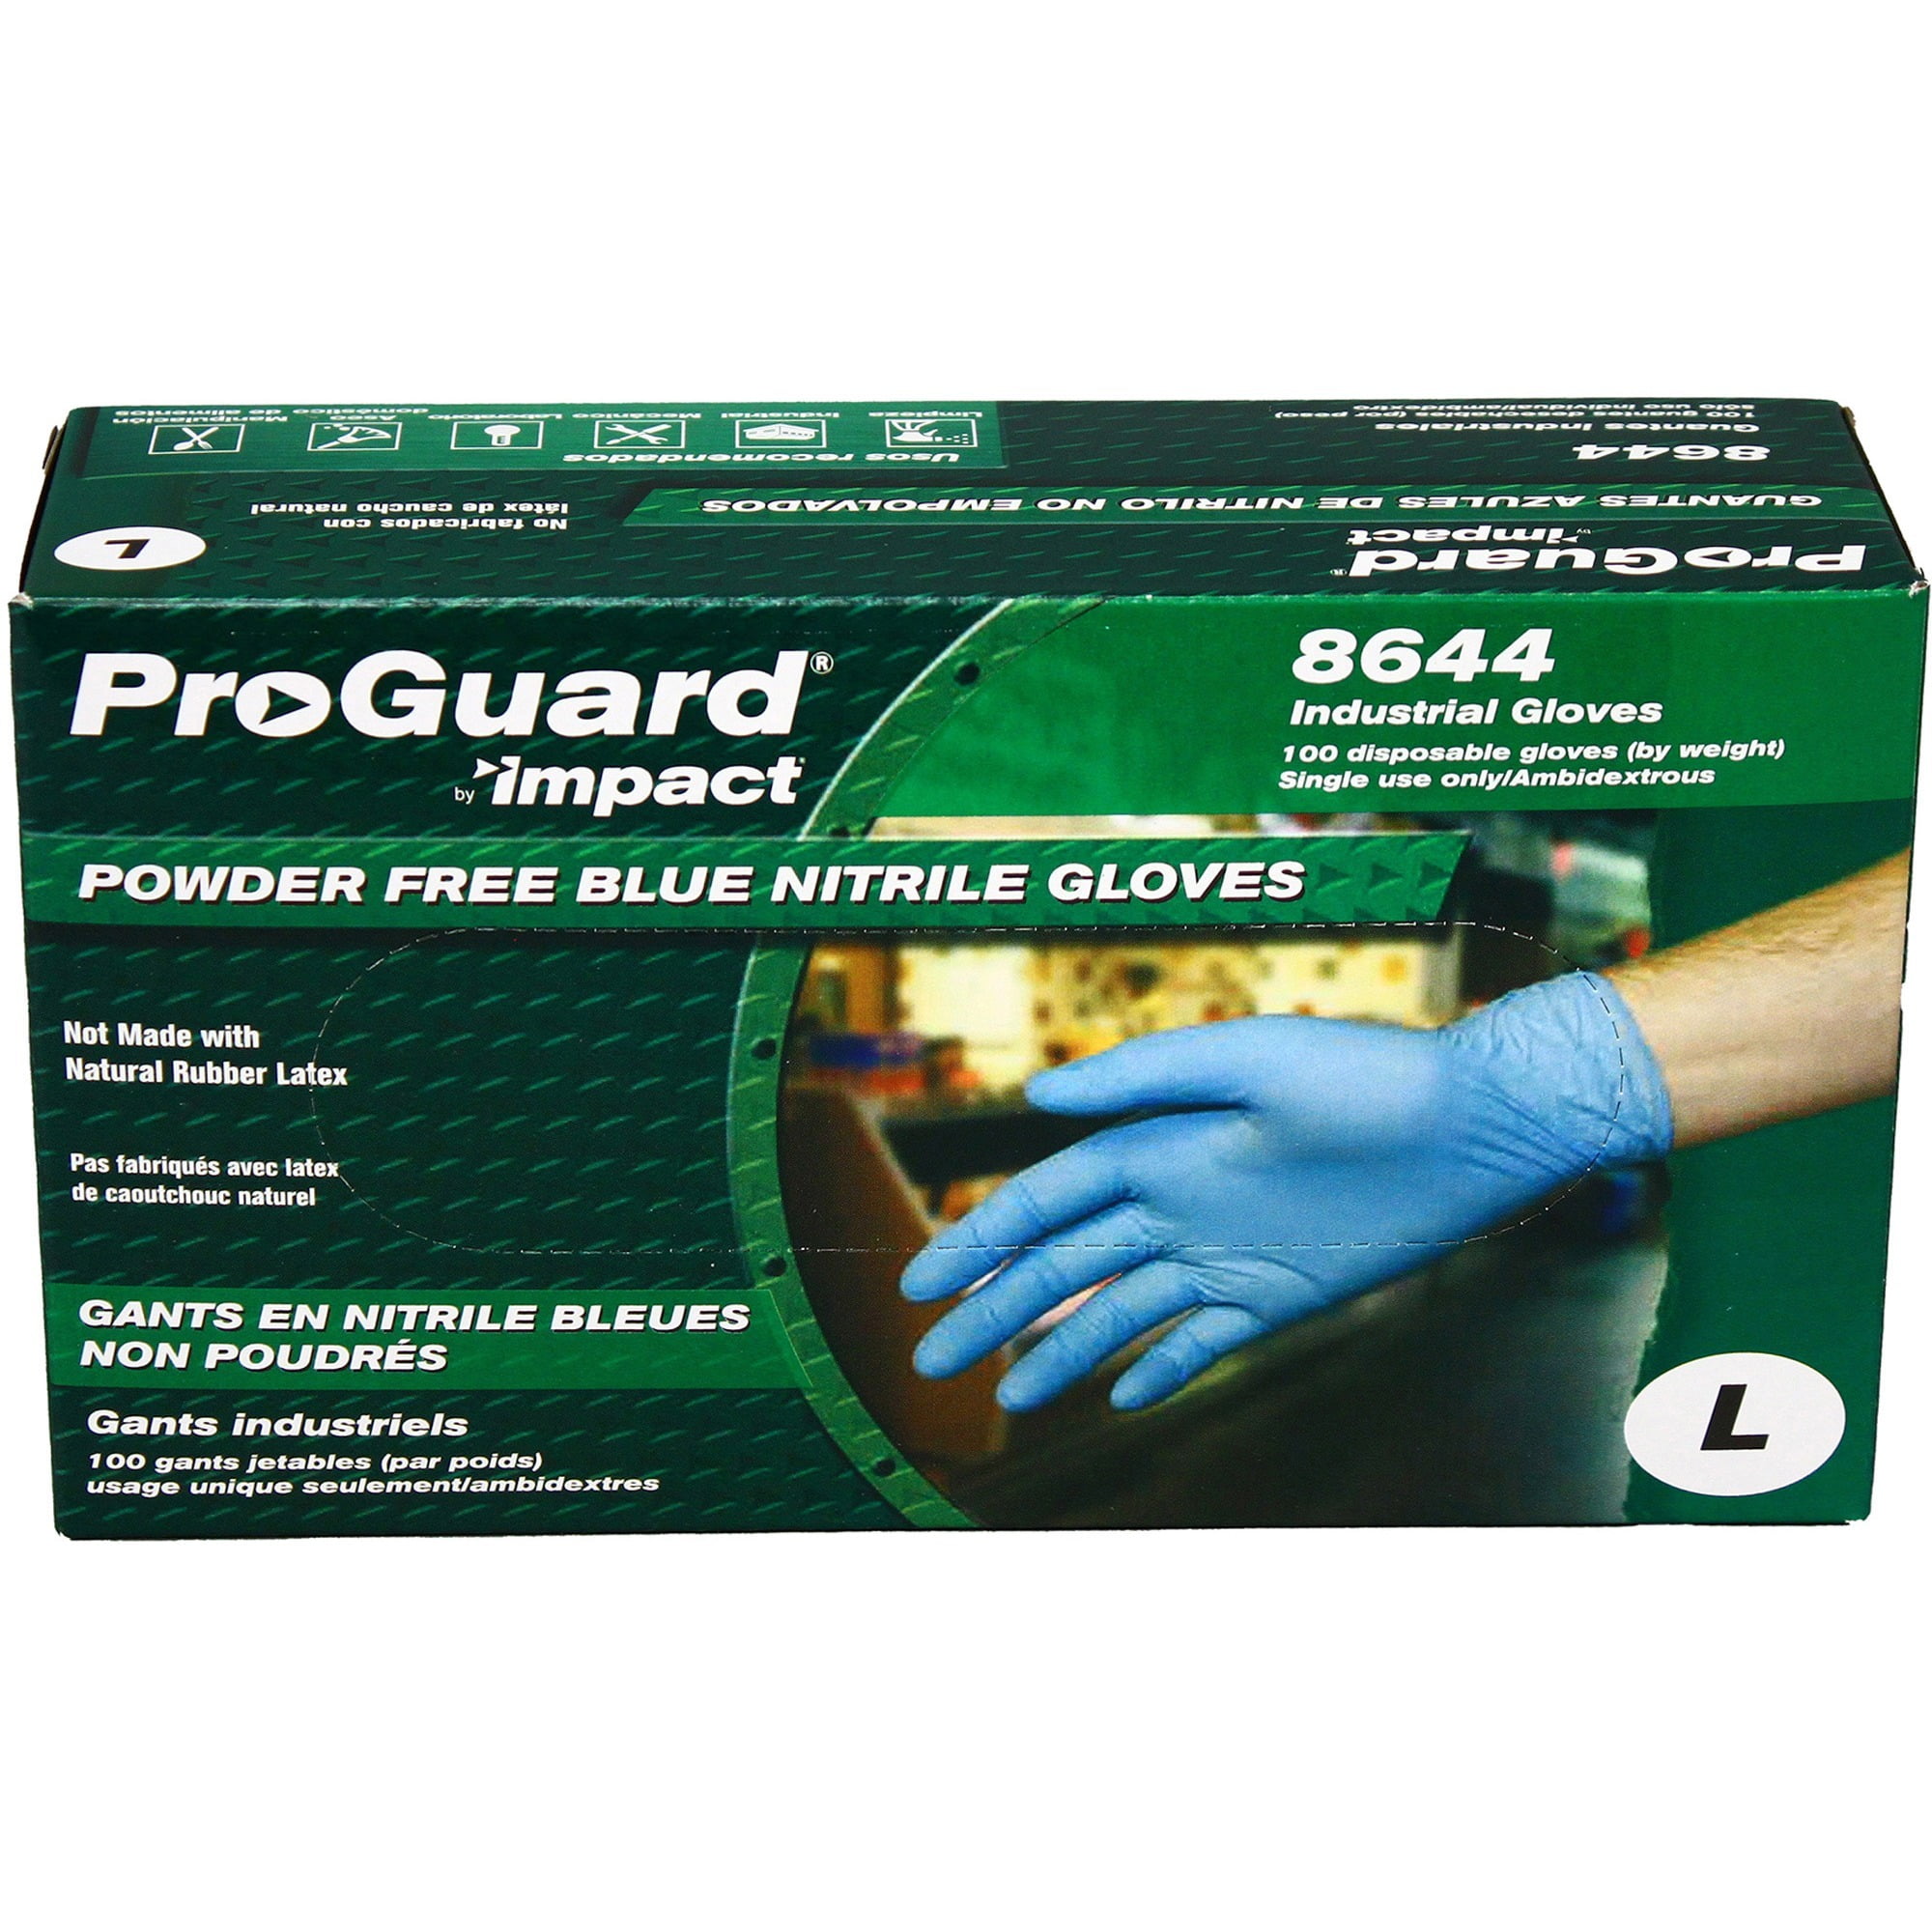 Craft Supplies & Tools Emerald Virtual Skin Nitrile Gloves Size Large Lg L Box of 100 Blue New in Box Food Safe Craft DIY General Purpose 